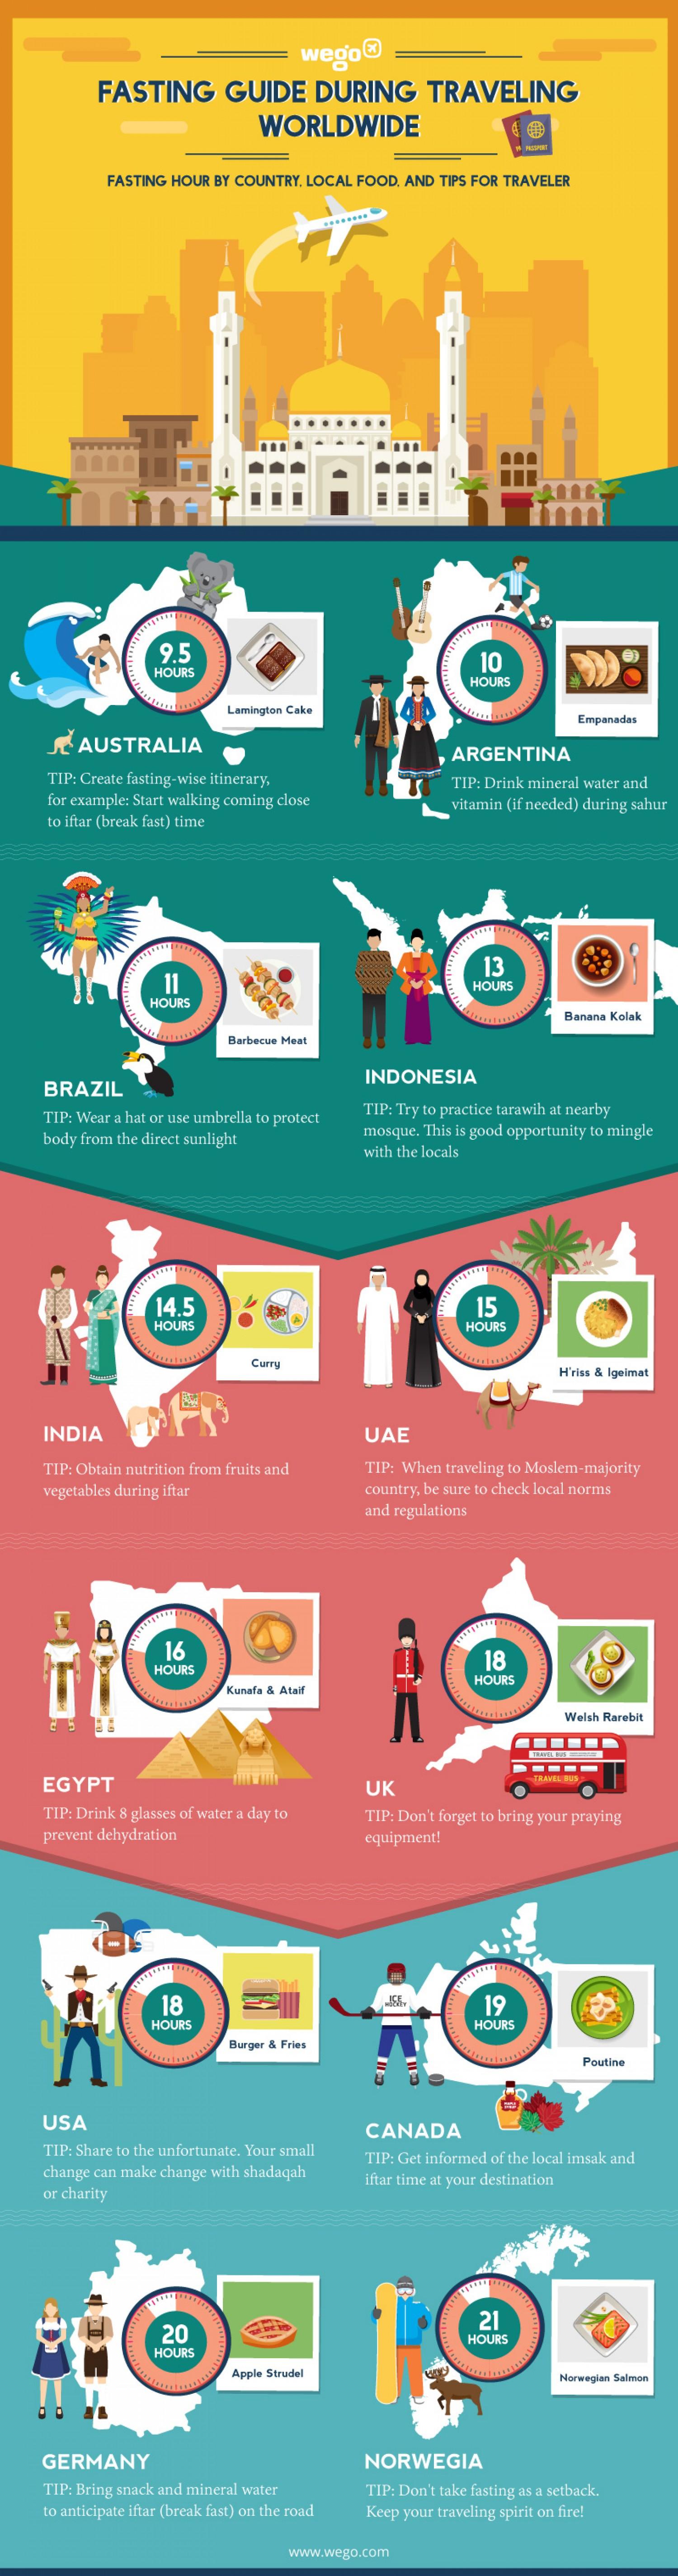 fasting guide during travelling worldwide